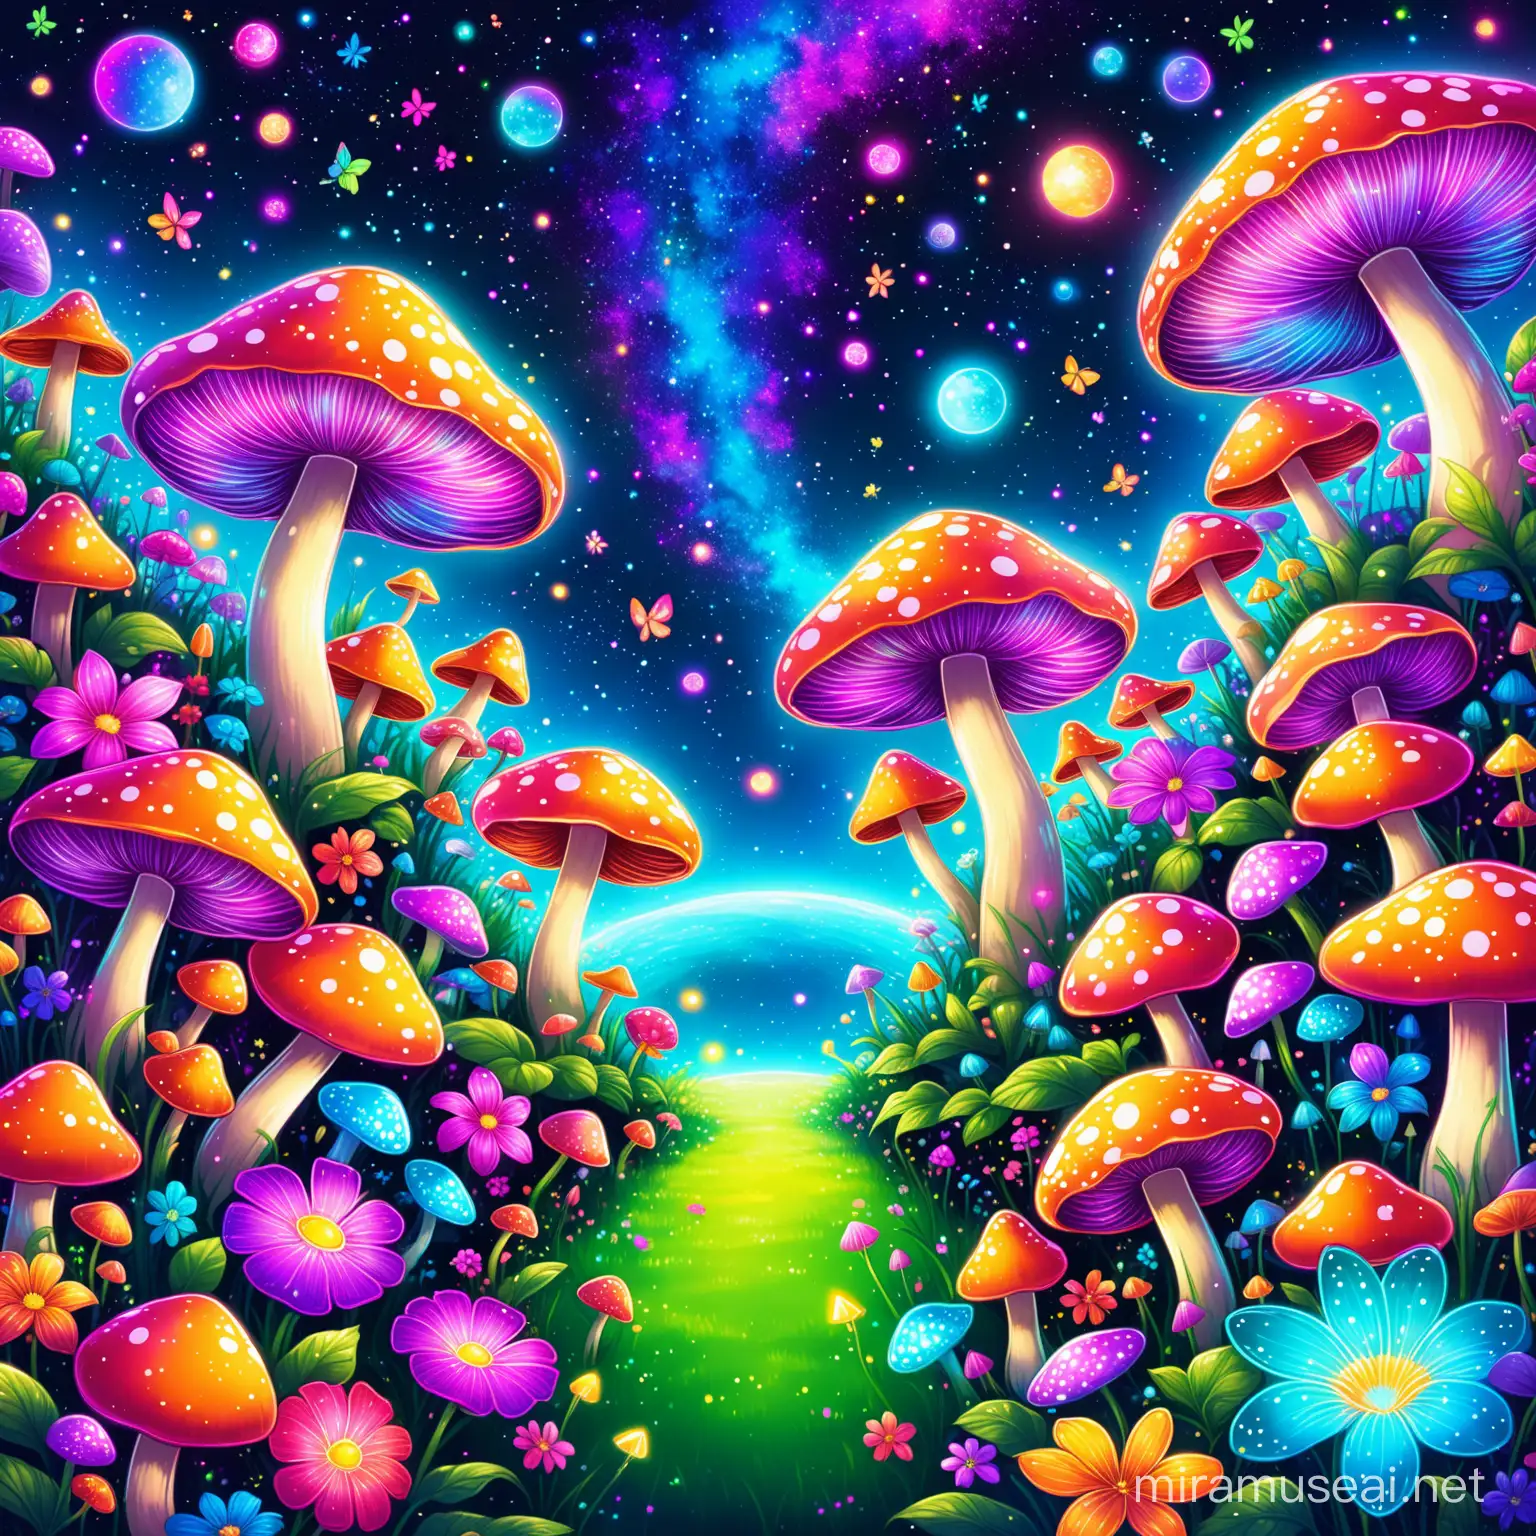 Romantic, whimsical, colorful, neon, flowers, eyes, mushrooms, space, garden